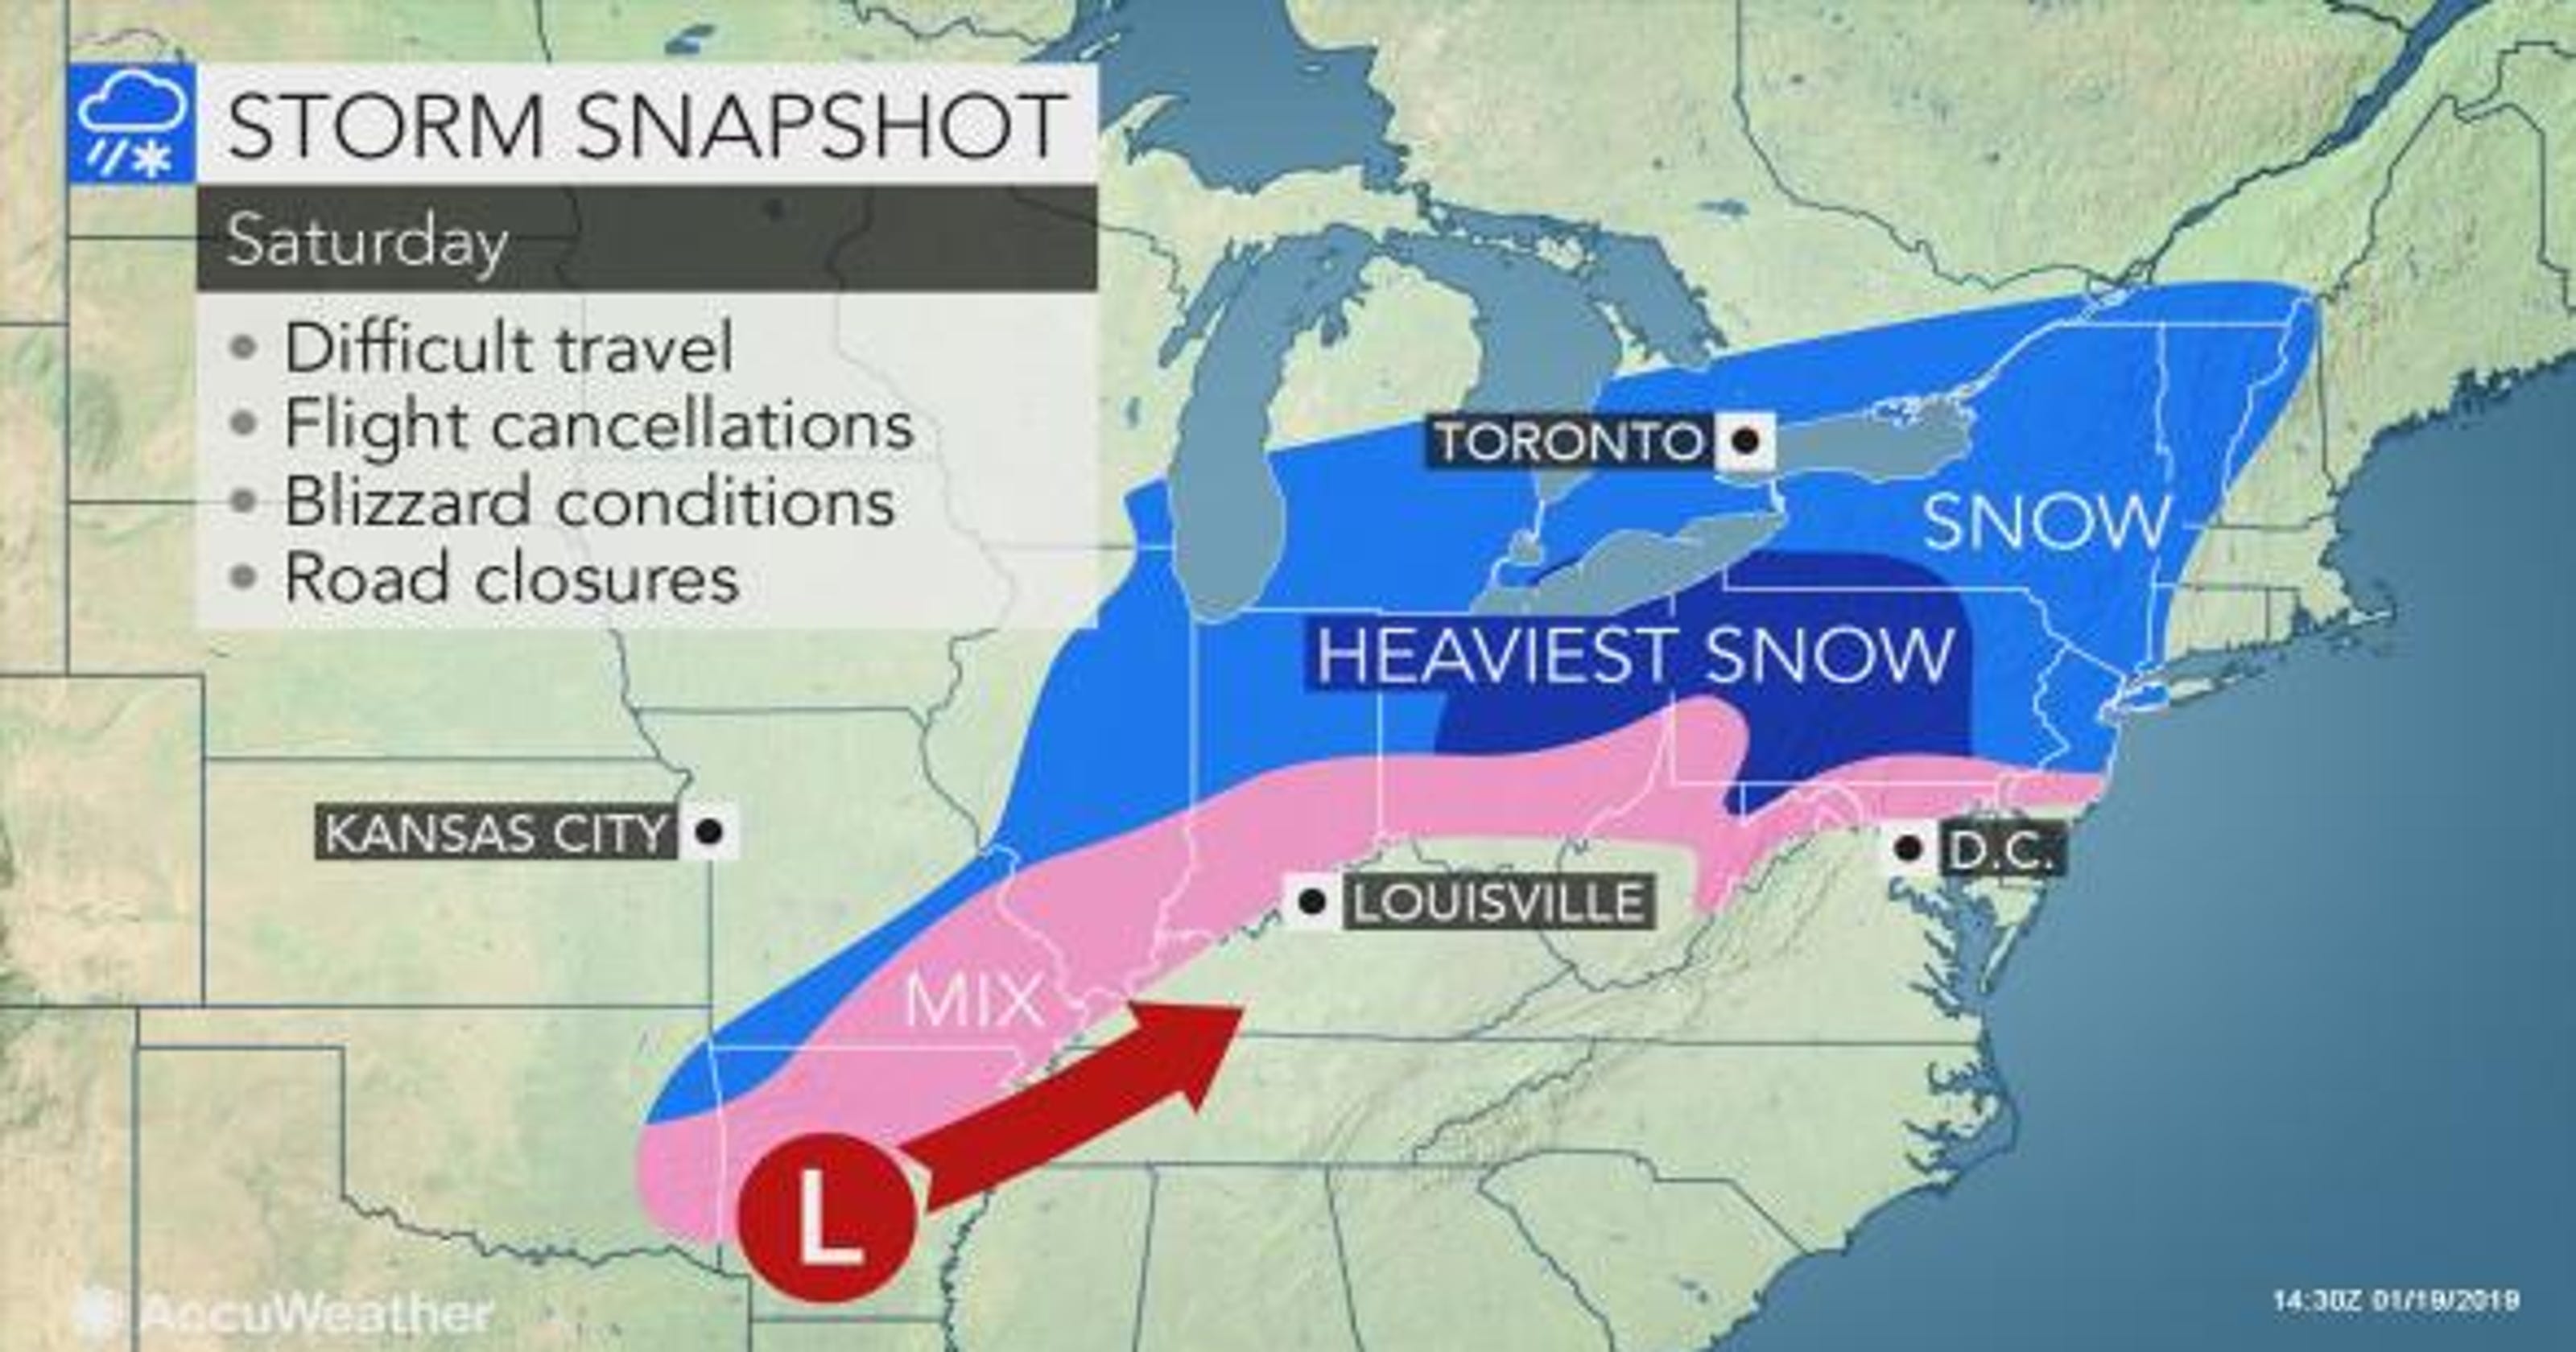 Winter storm in New York to drop over a foot of snow, arctic freeze